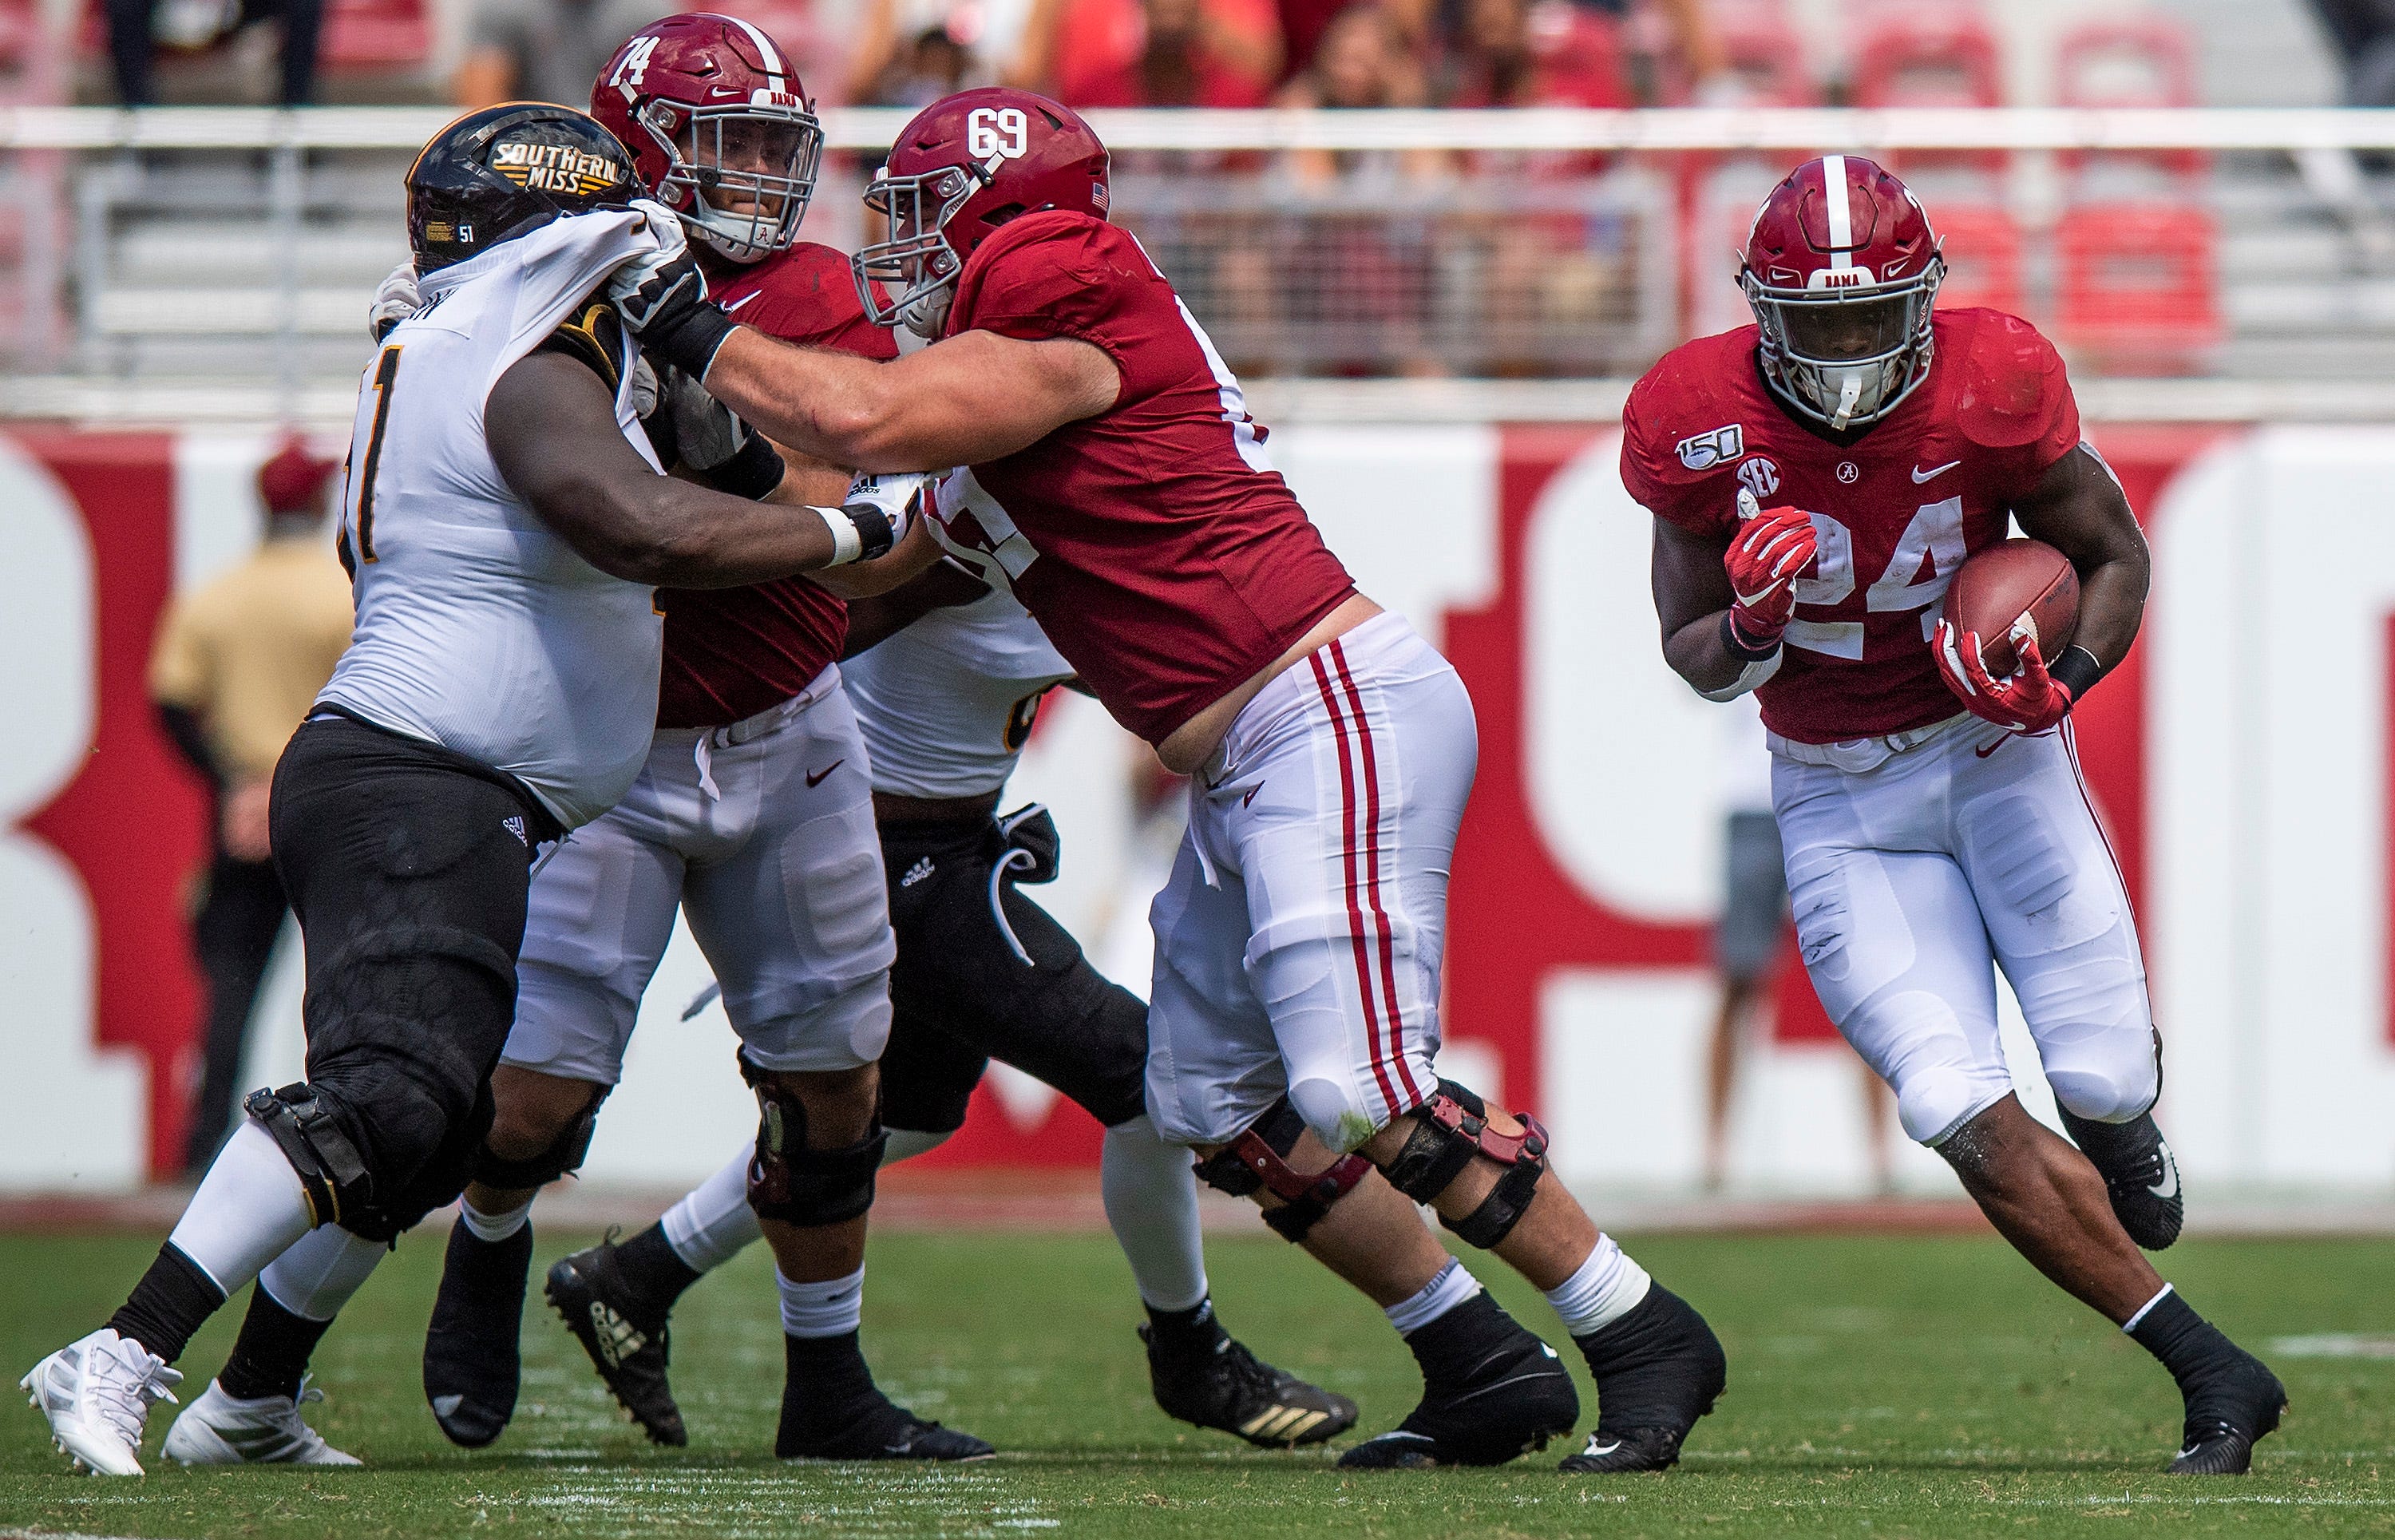 Alabama running back Brian Robinson, Jr., (24) carries behind the blocking of Alabama offensive linemen Landon Dickerson (69) and Jedrick Wills, Jr., (74) against Southern Miss at Bryant-Denny Stadium in Tuscaloosa, Ala., on Saturday September 21, 2019.